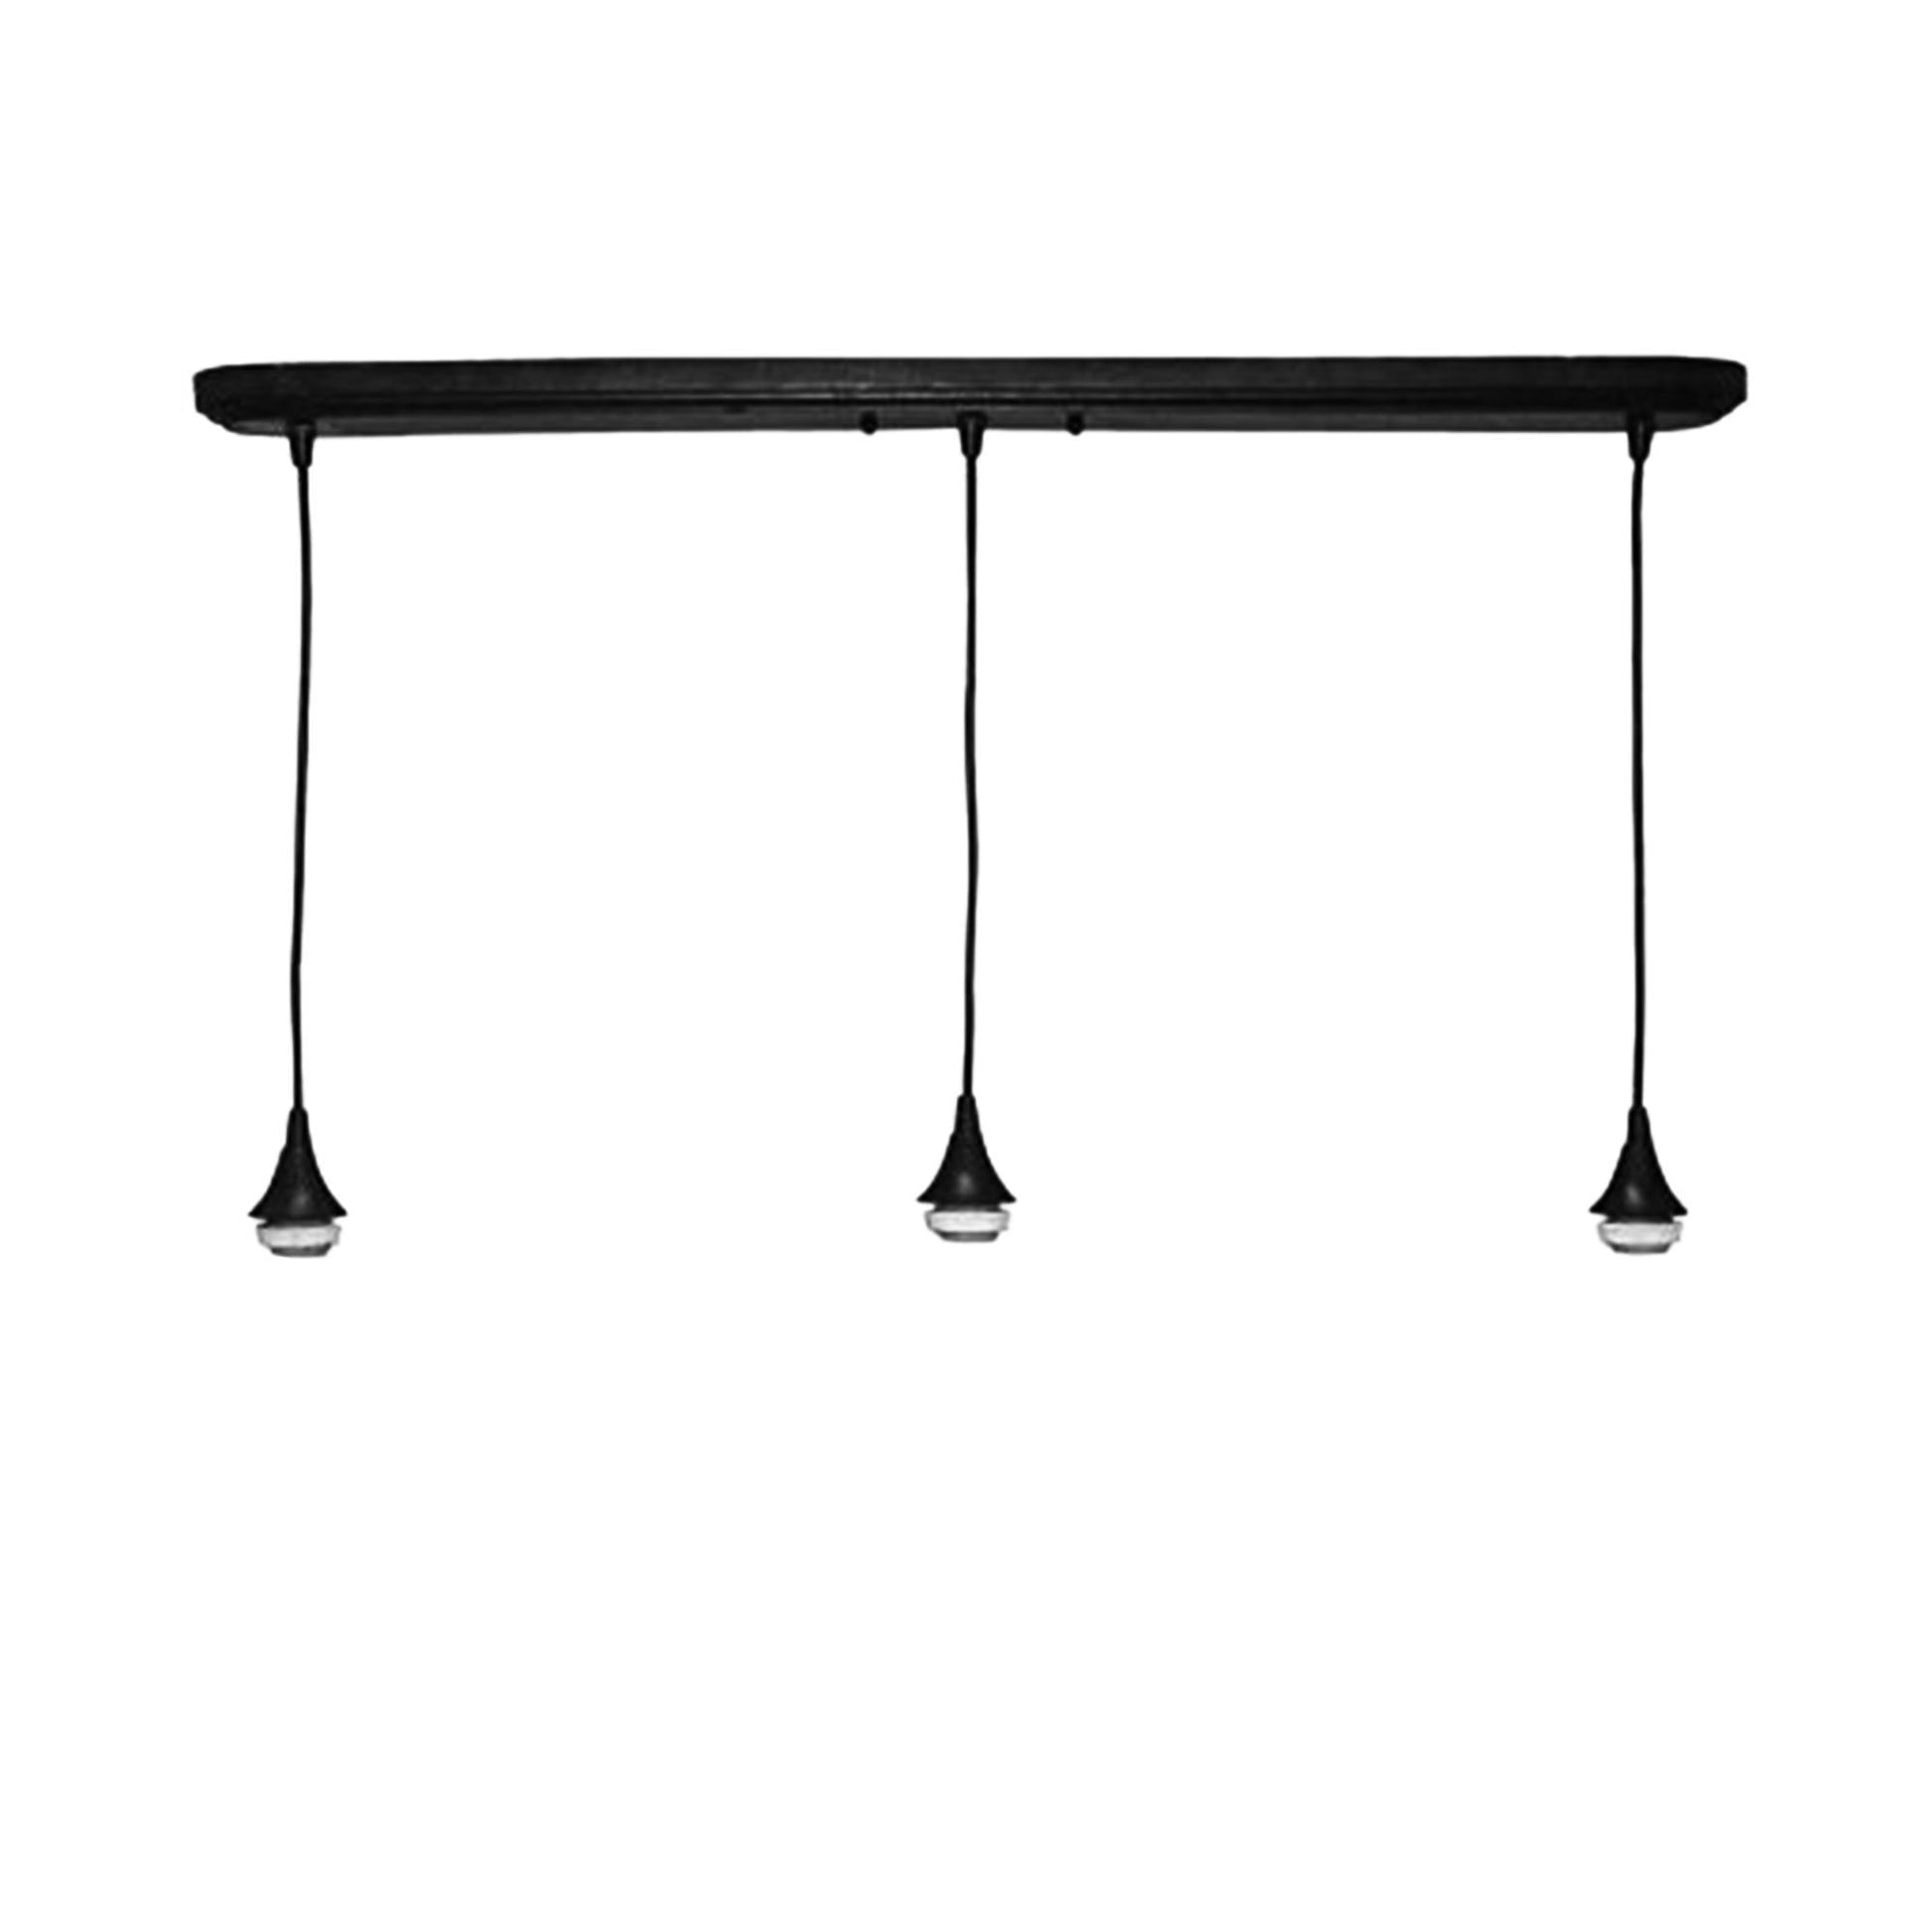 3 Pendant Linear Chandelier Hardware-Hardware-Bicycle Glass Co-Black-Standard-5 ft-Bicycle Glass Co